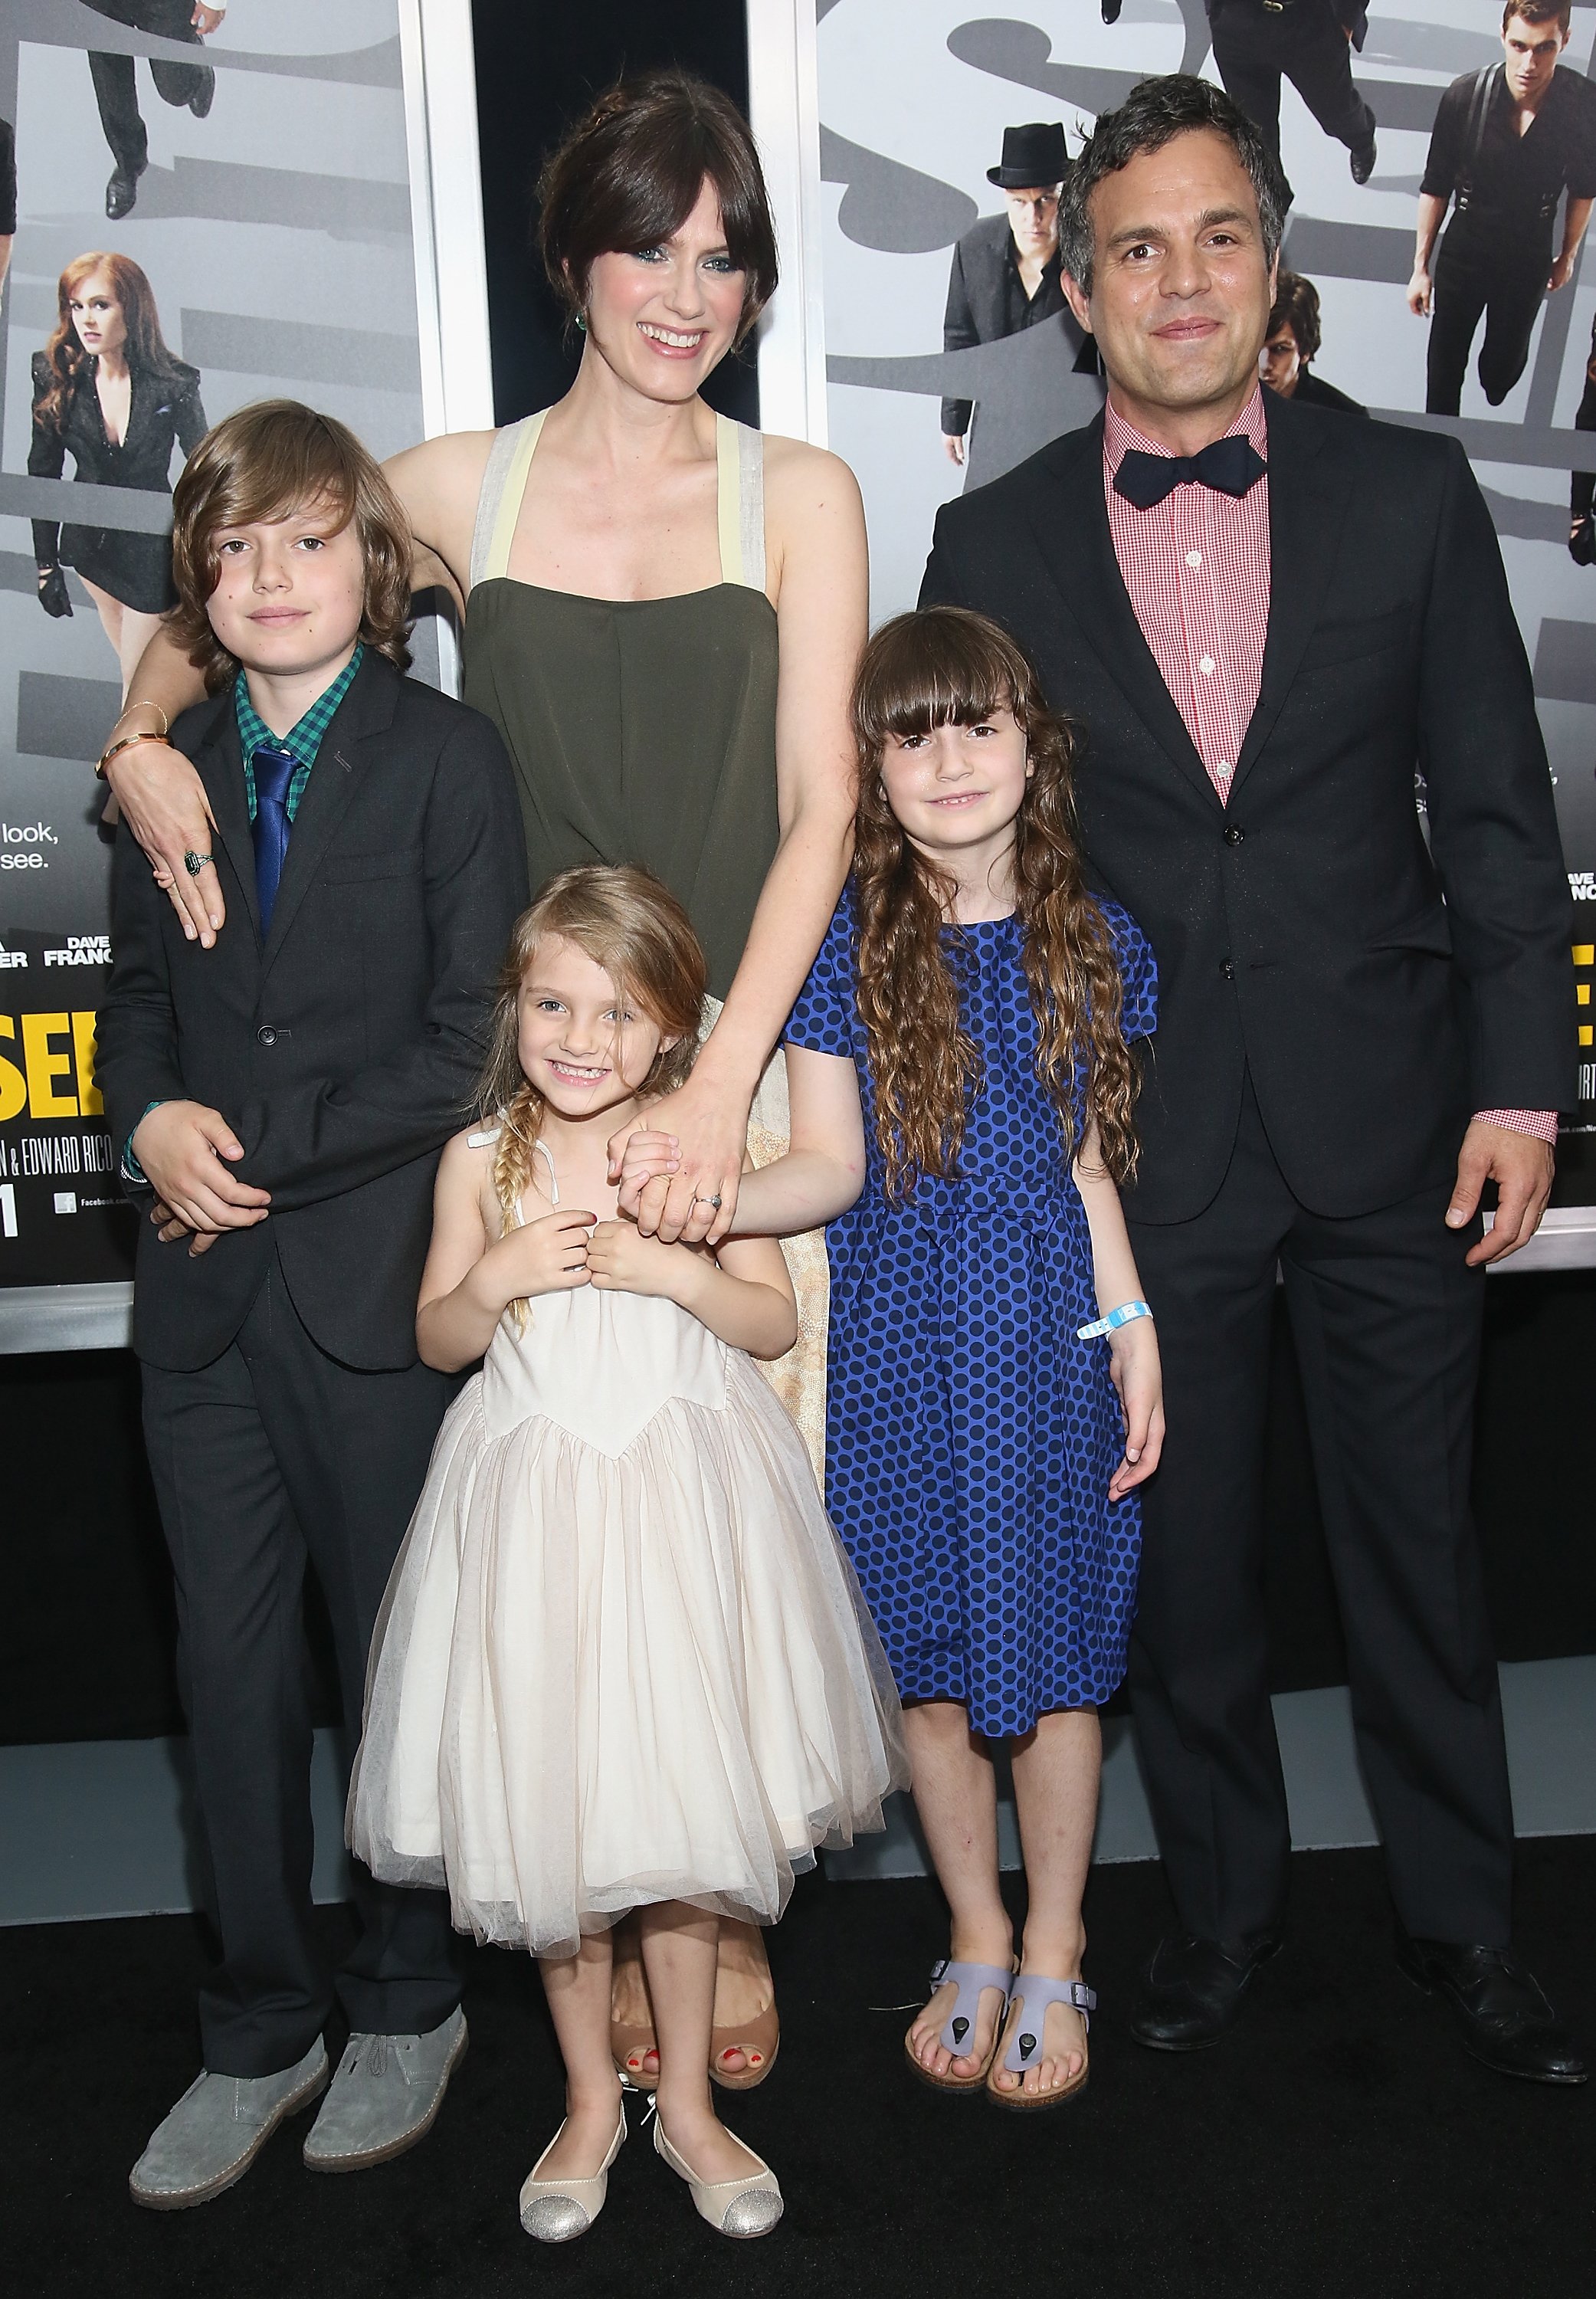 Actor Mark Ruffalo and Sunrise Coigney with family at the "Now You See Me" New York Premiere at AMC Lincoln Square Theater on May 21, 2013, in New York City. | Source: Getty Images